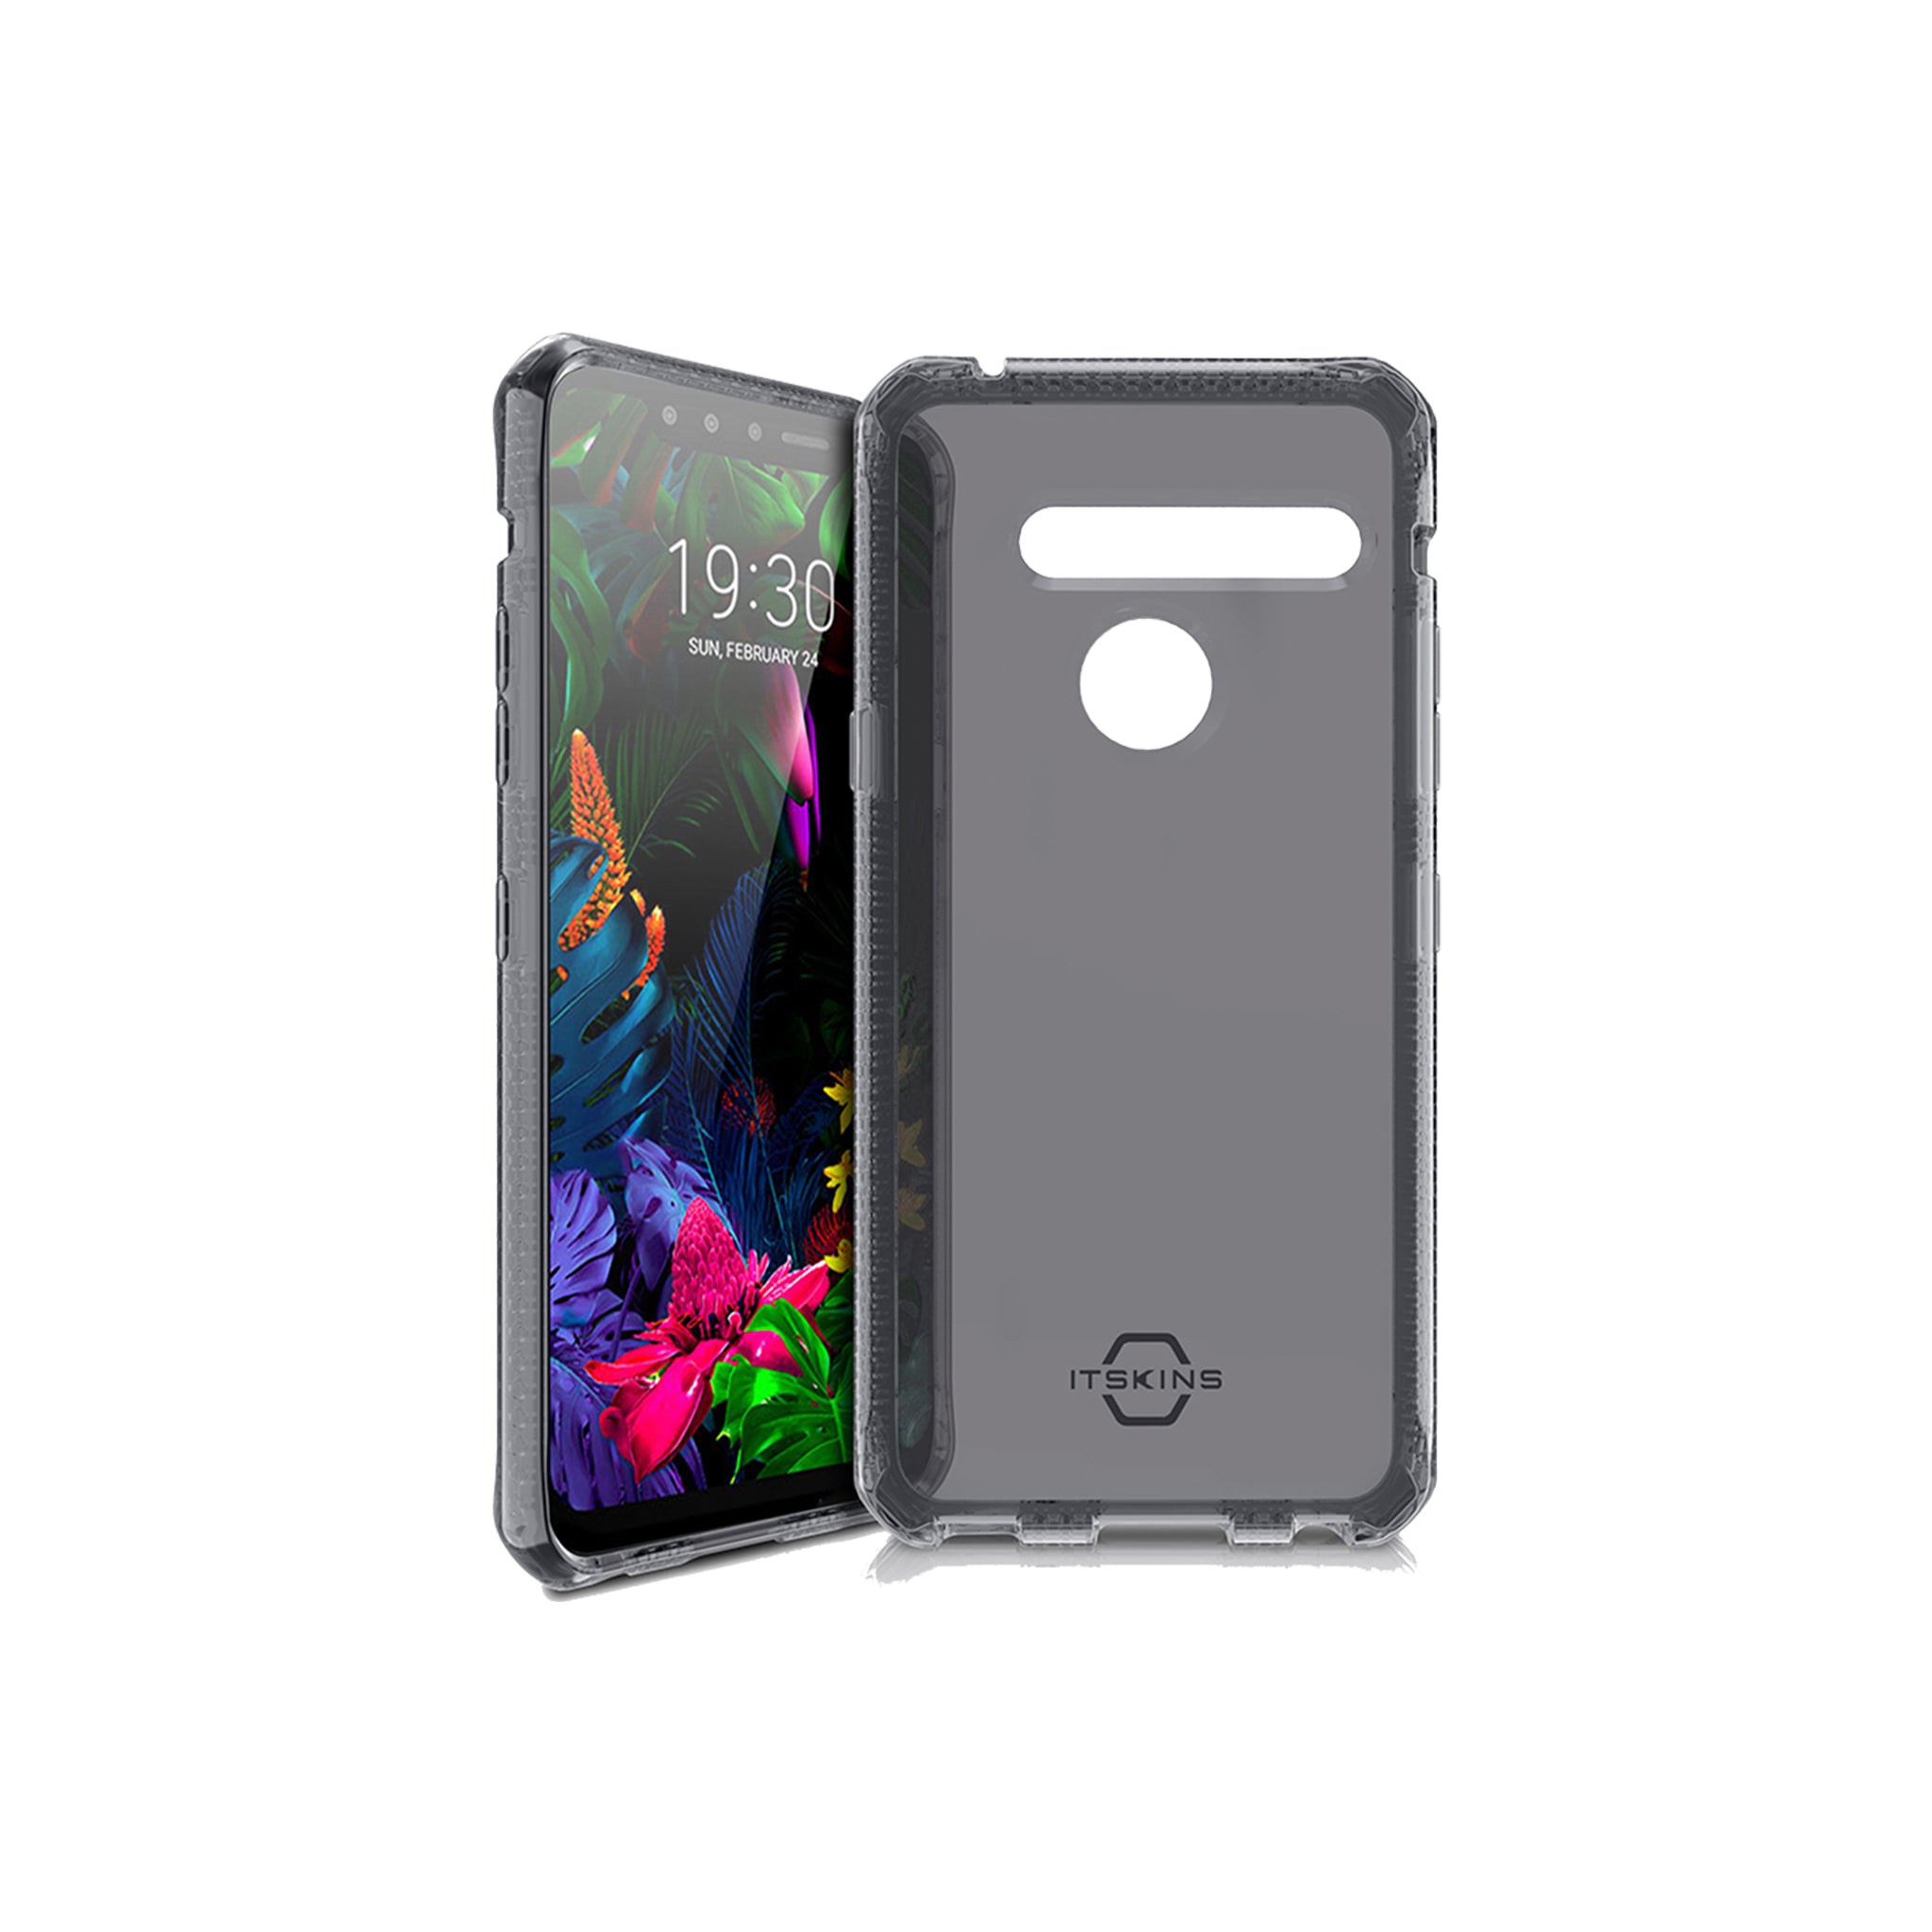 Itskins - Spectrum Clear Case For Lg G8 Thinq - Smoke